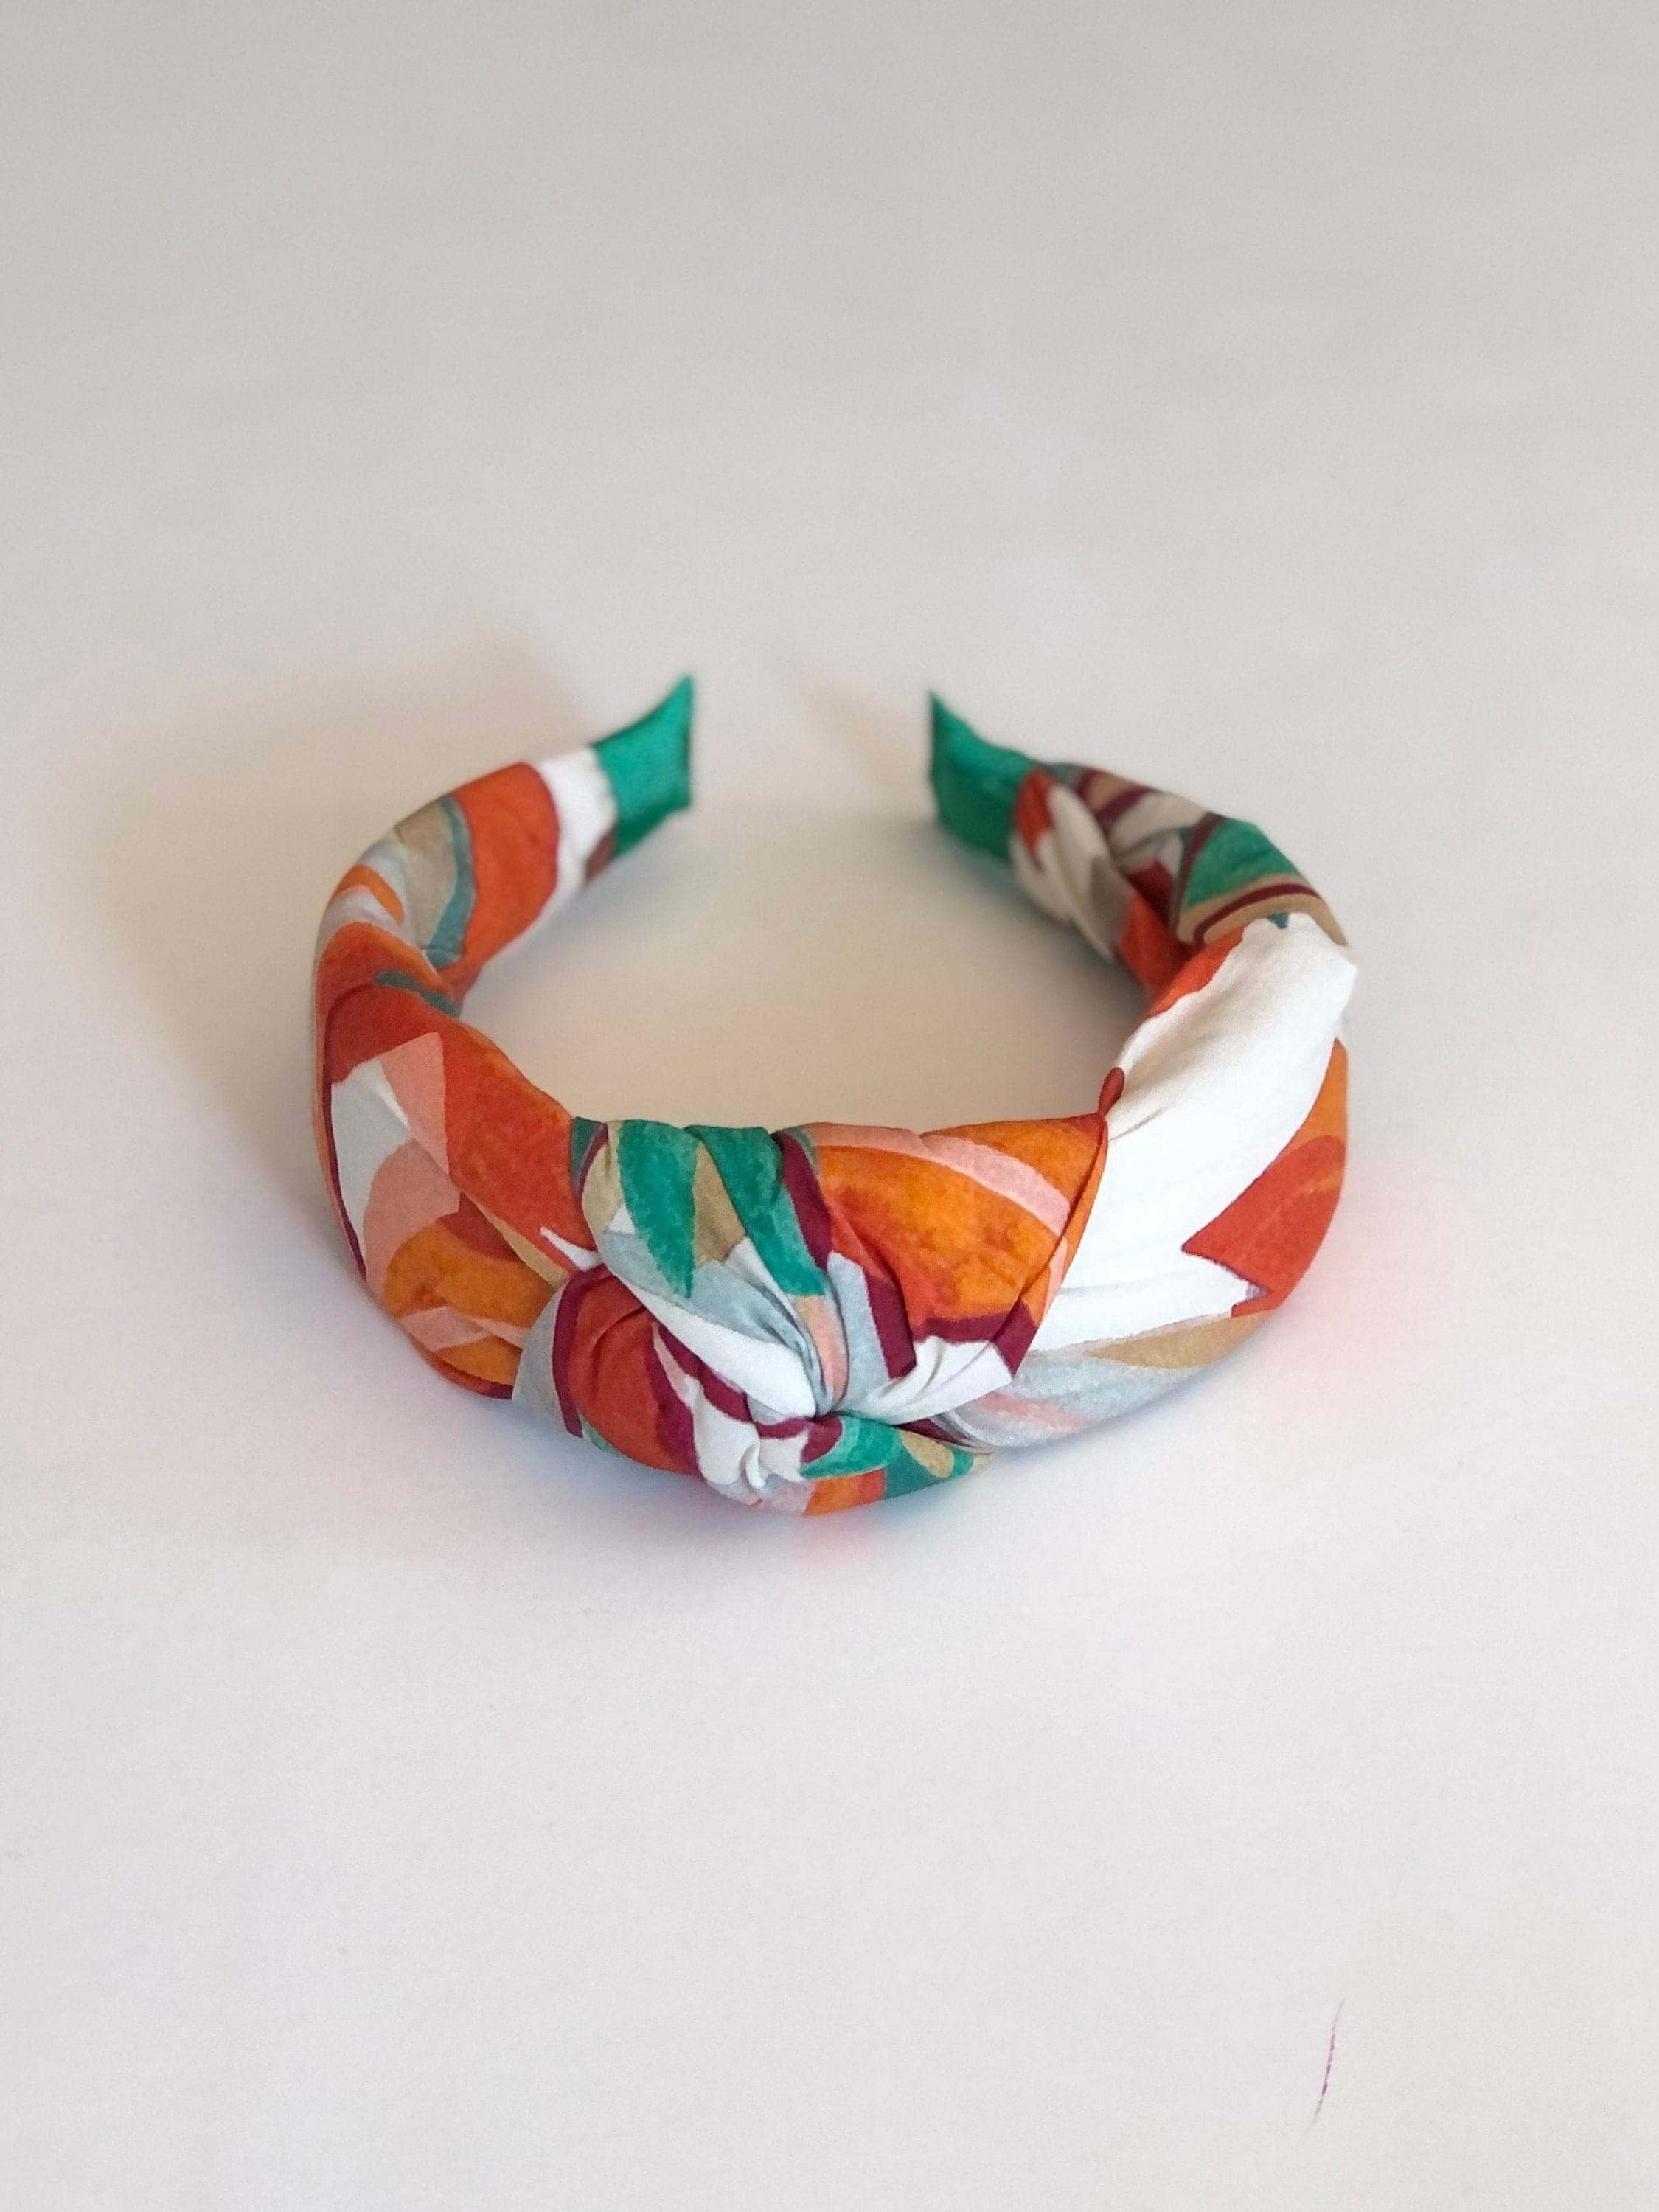 The perfect accessory for any outfit - a versatile knotted headband in a trendy cream, orange, and green color combination.